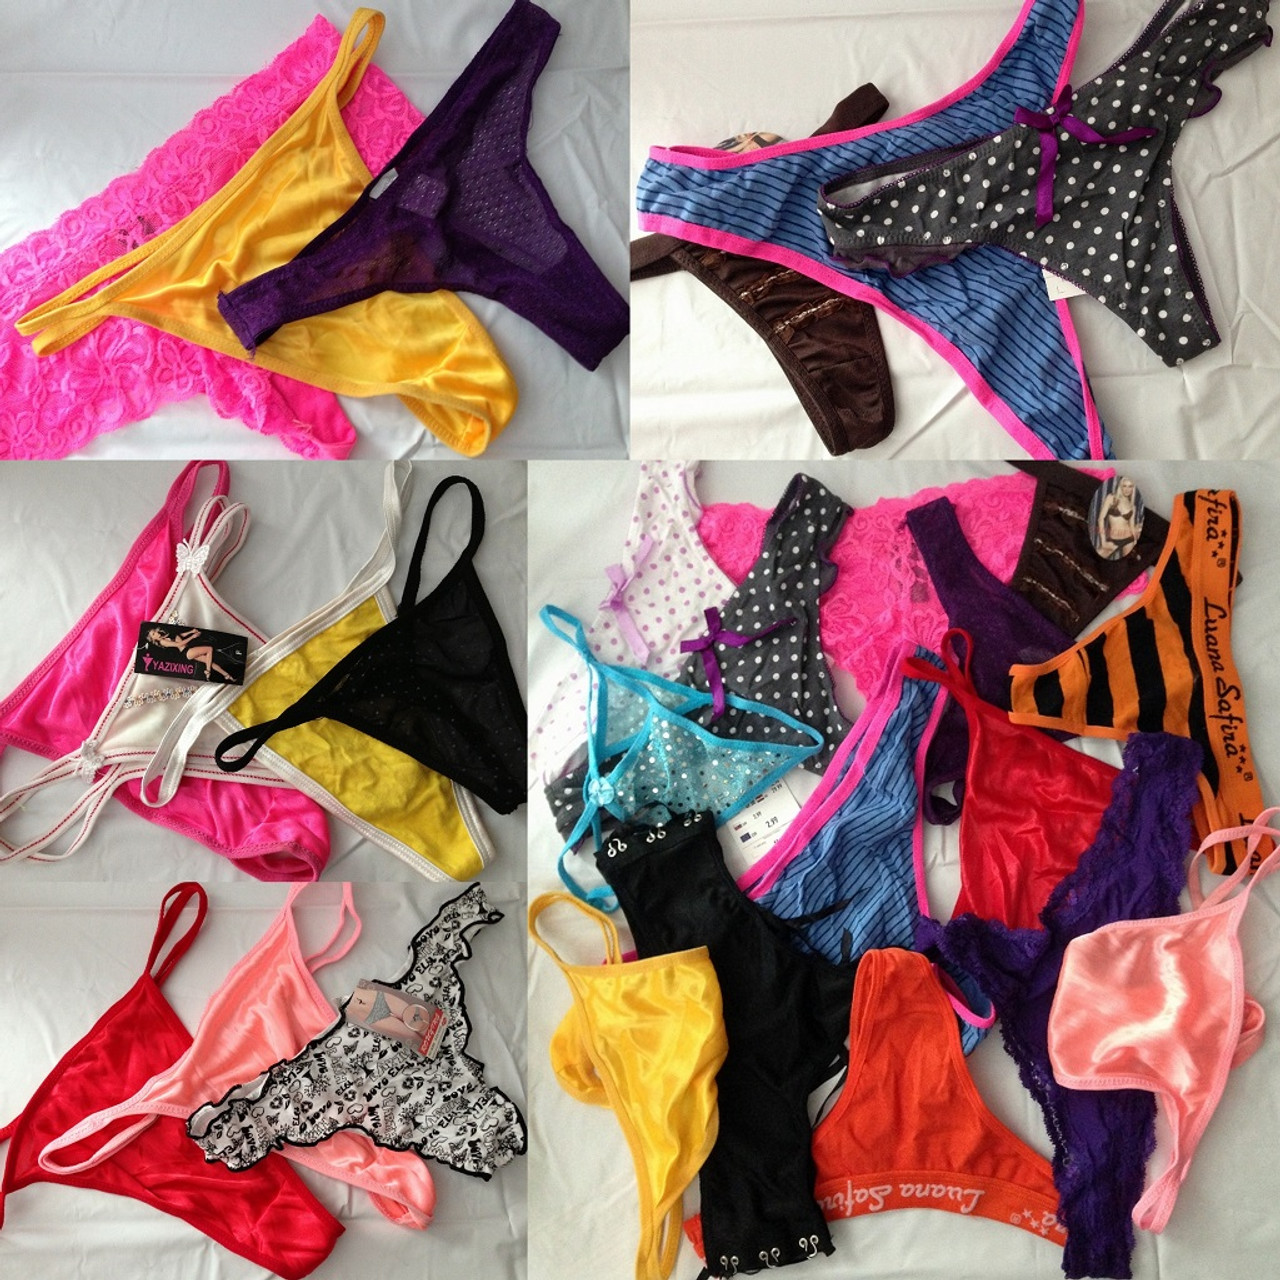 240 Wholesale Womens Lace Panties Size Assorted